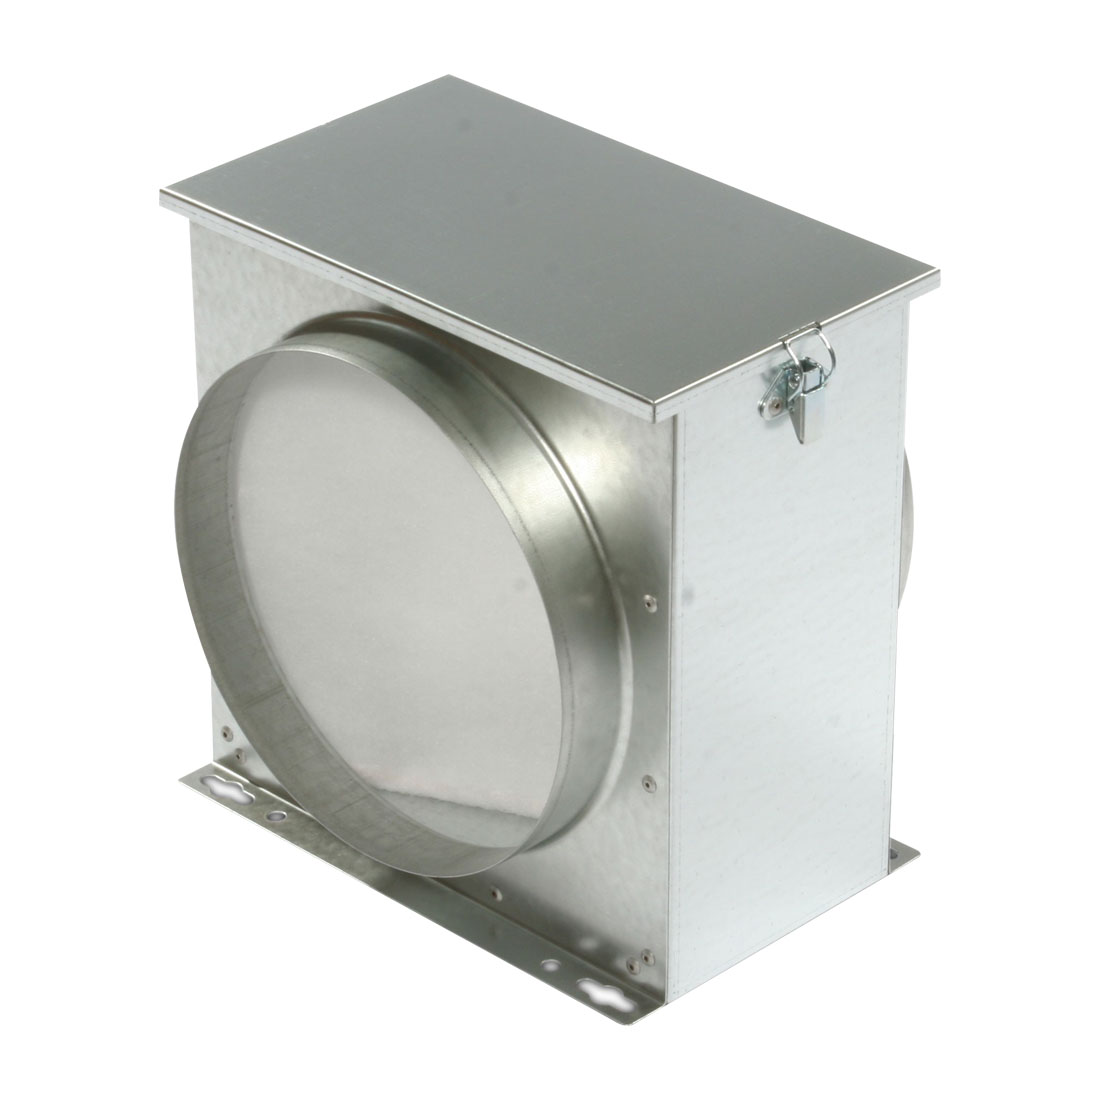 In-Line Filter Box